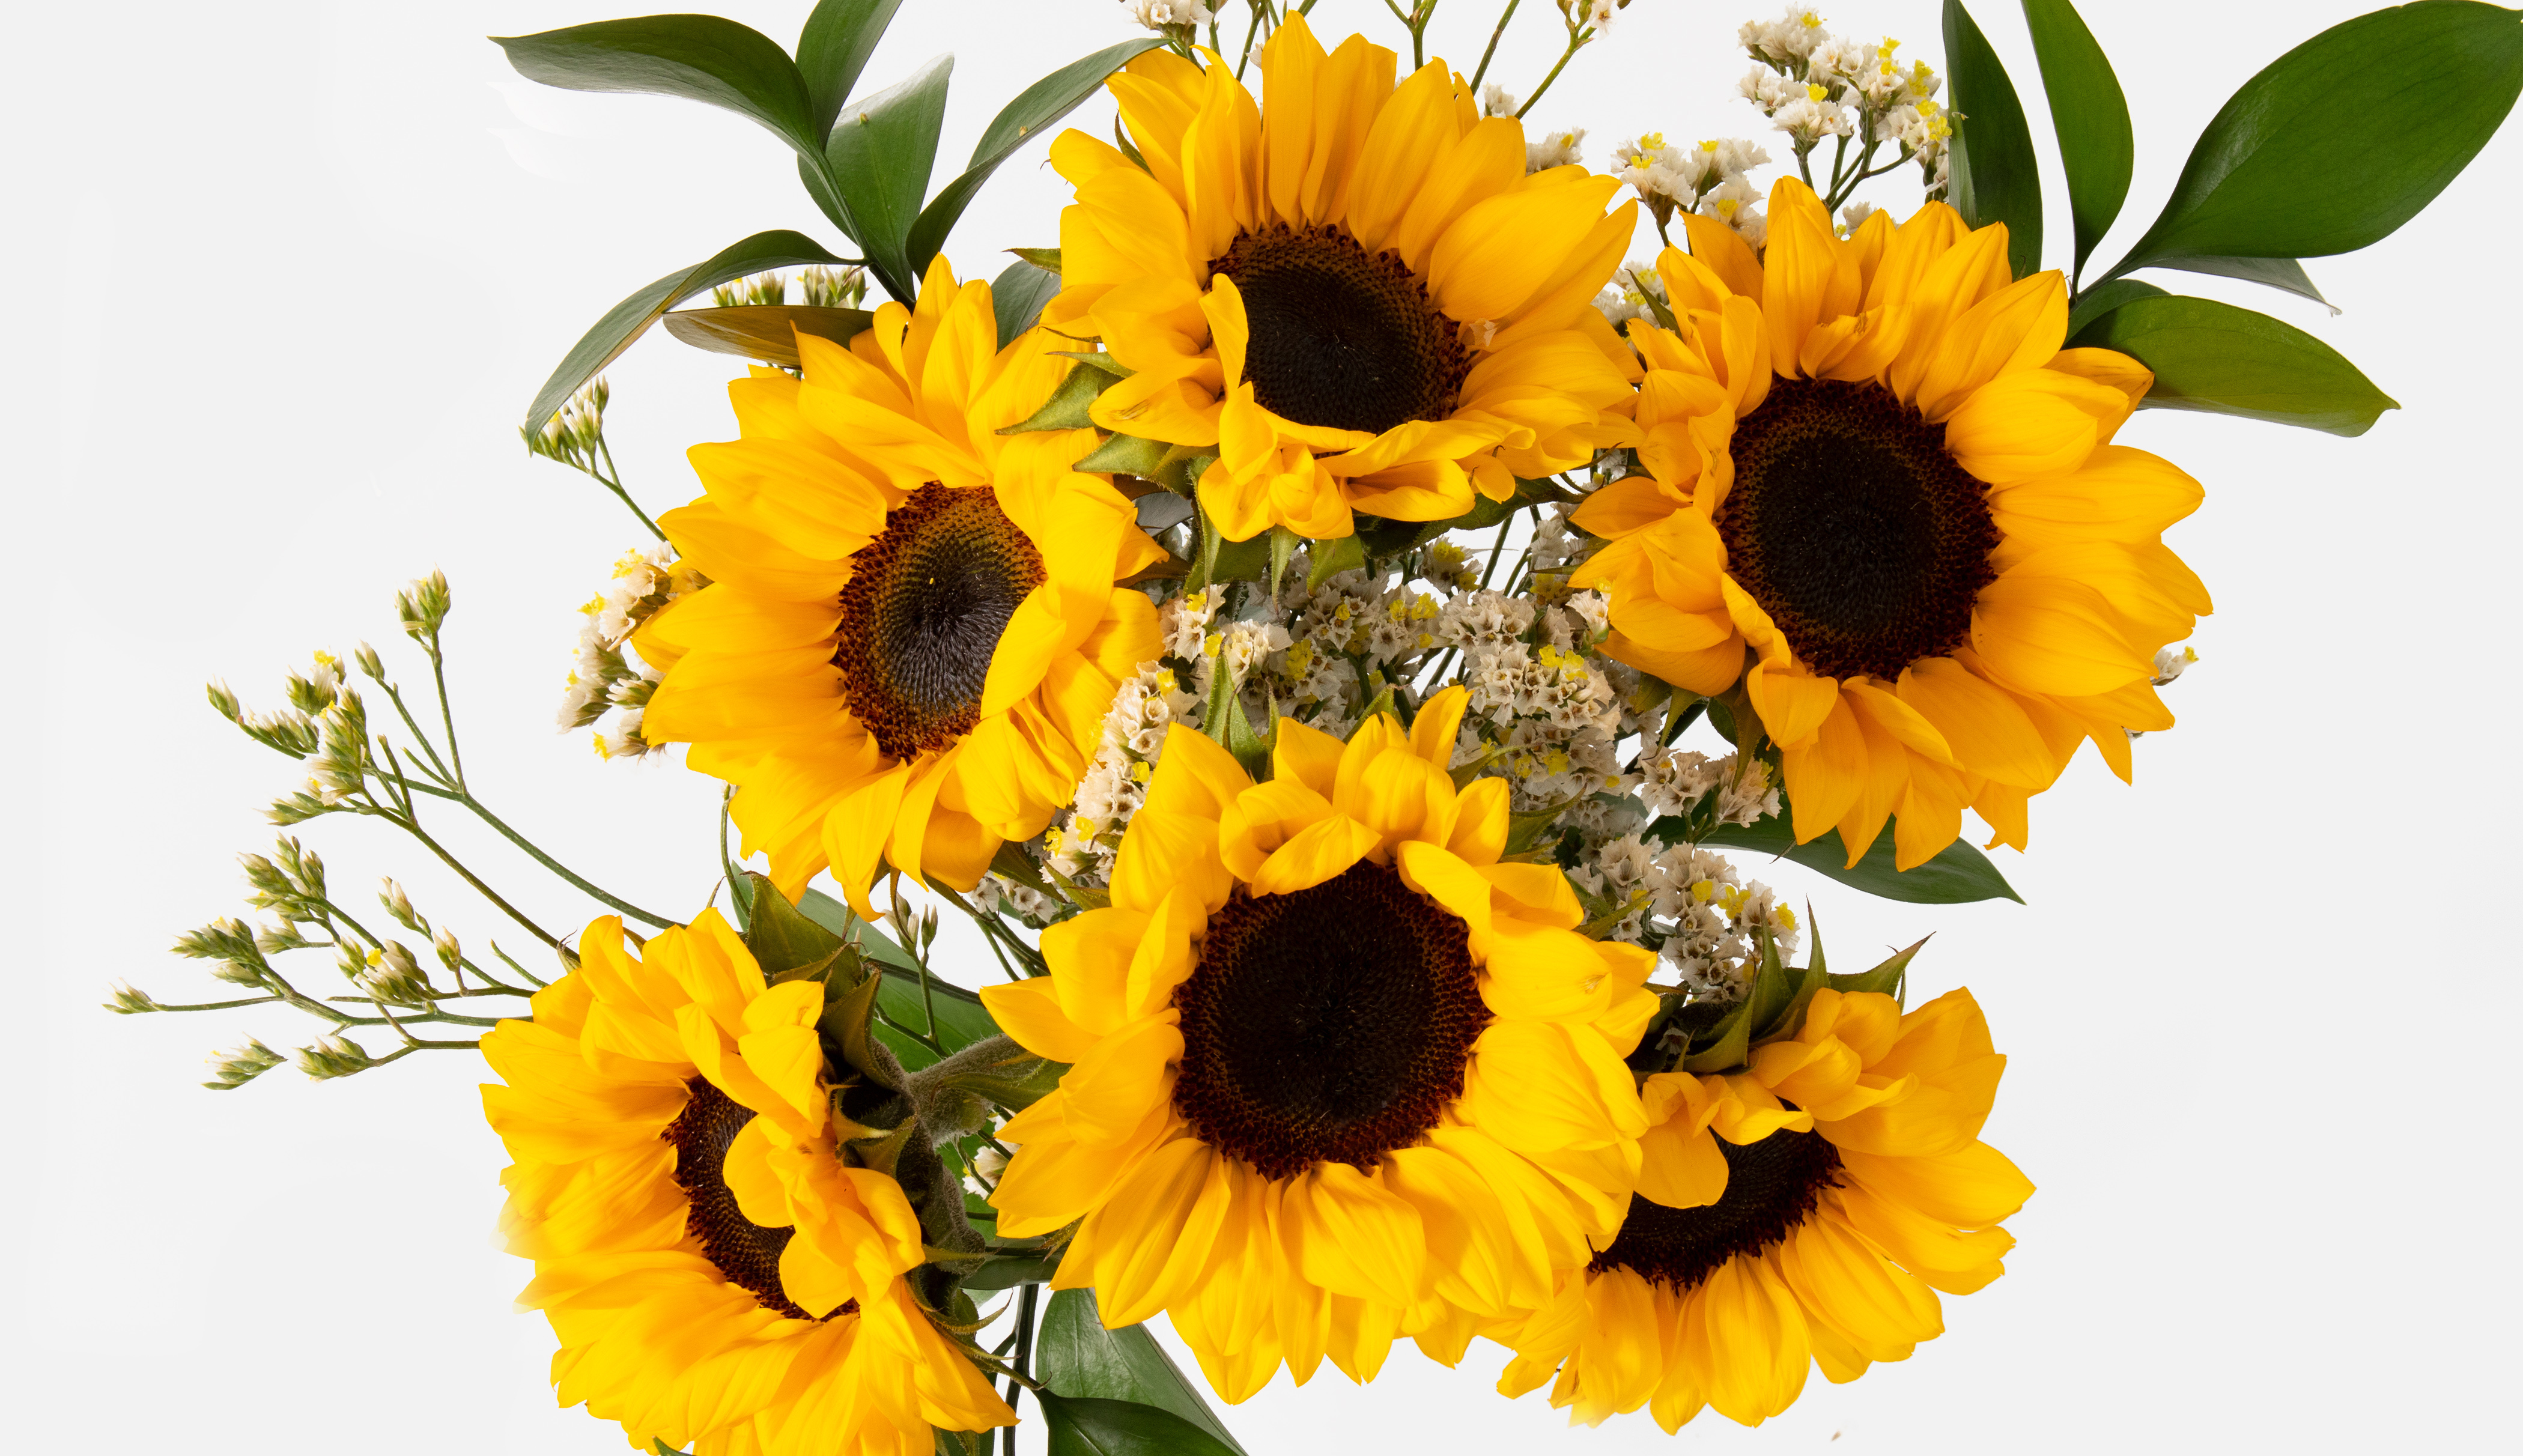 Top down view of sunflower bouquet.